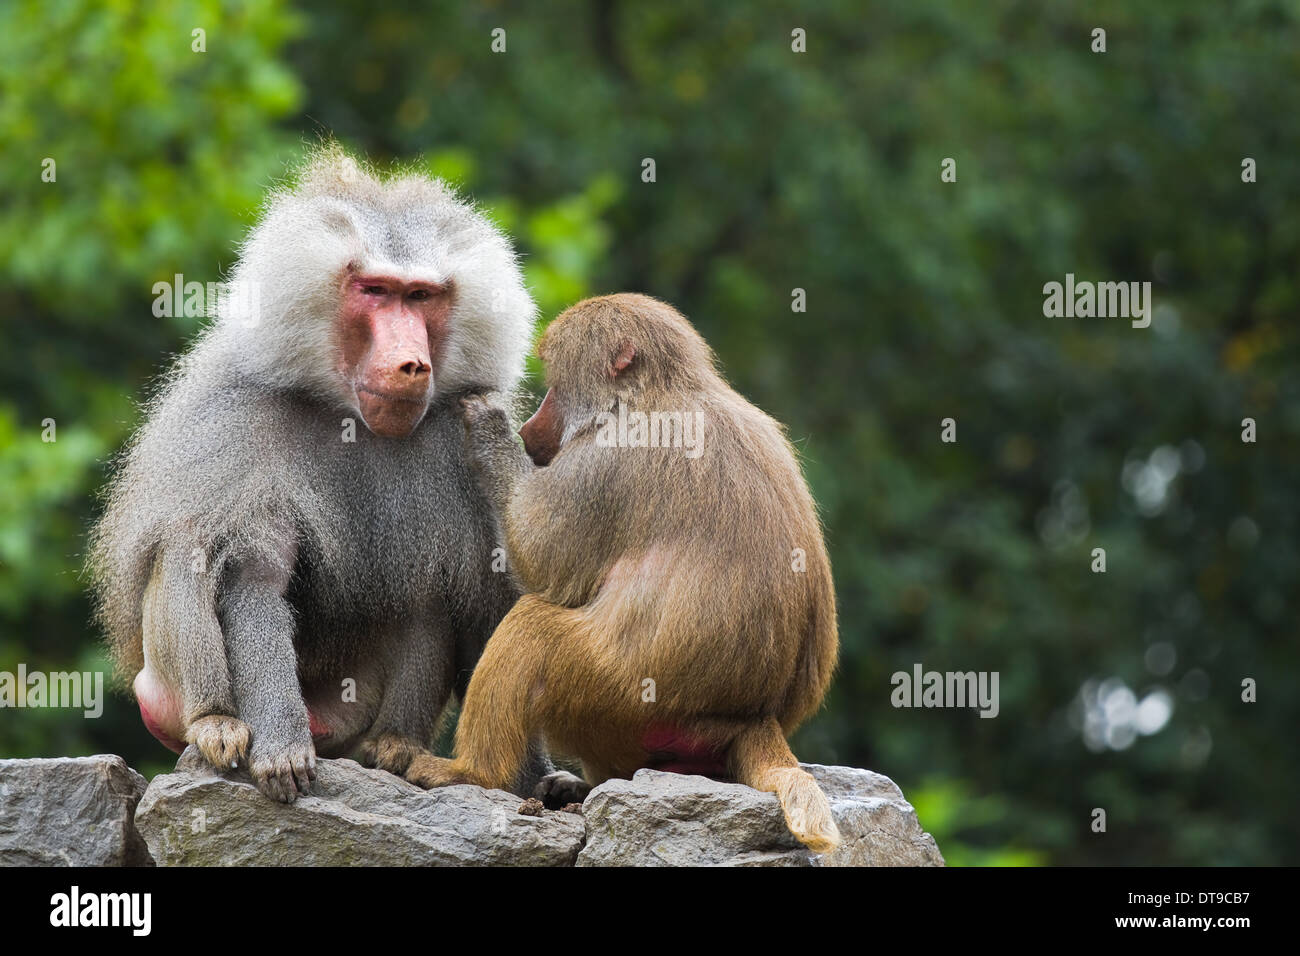 Two baboons sitting on rocks and catching fleas, with natural background of green    trees Stock Photo